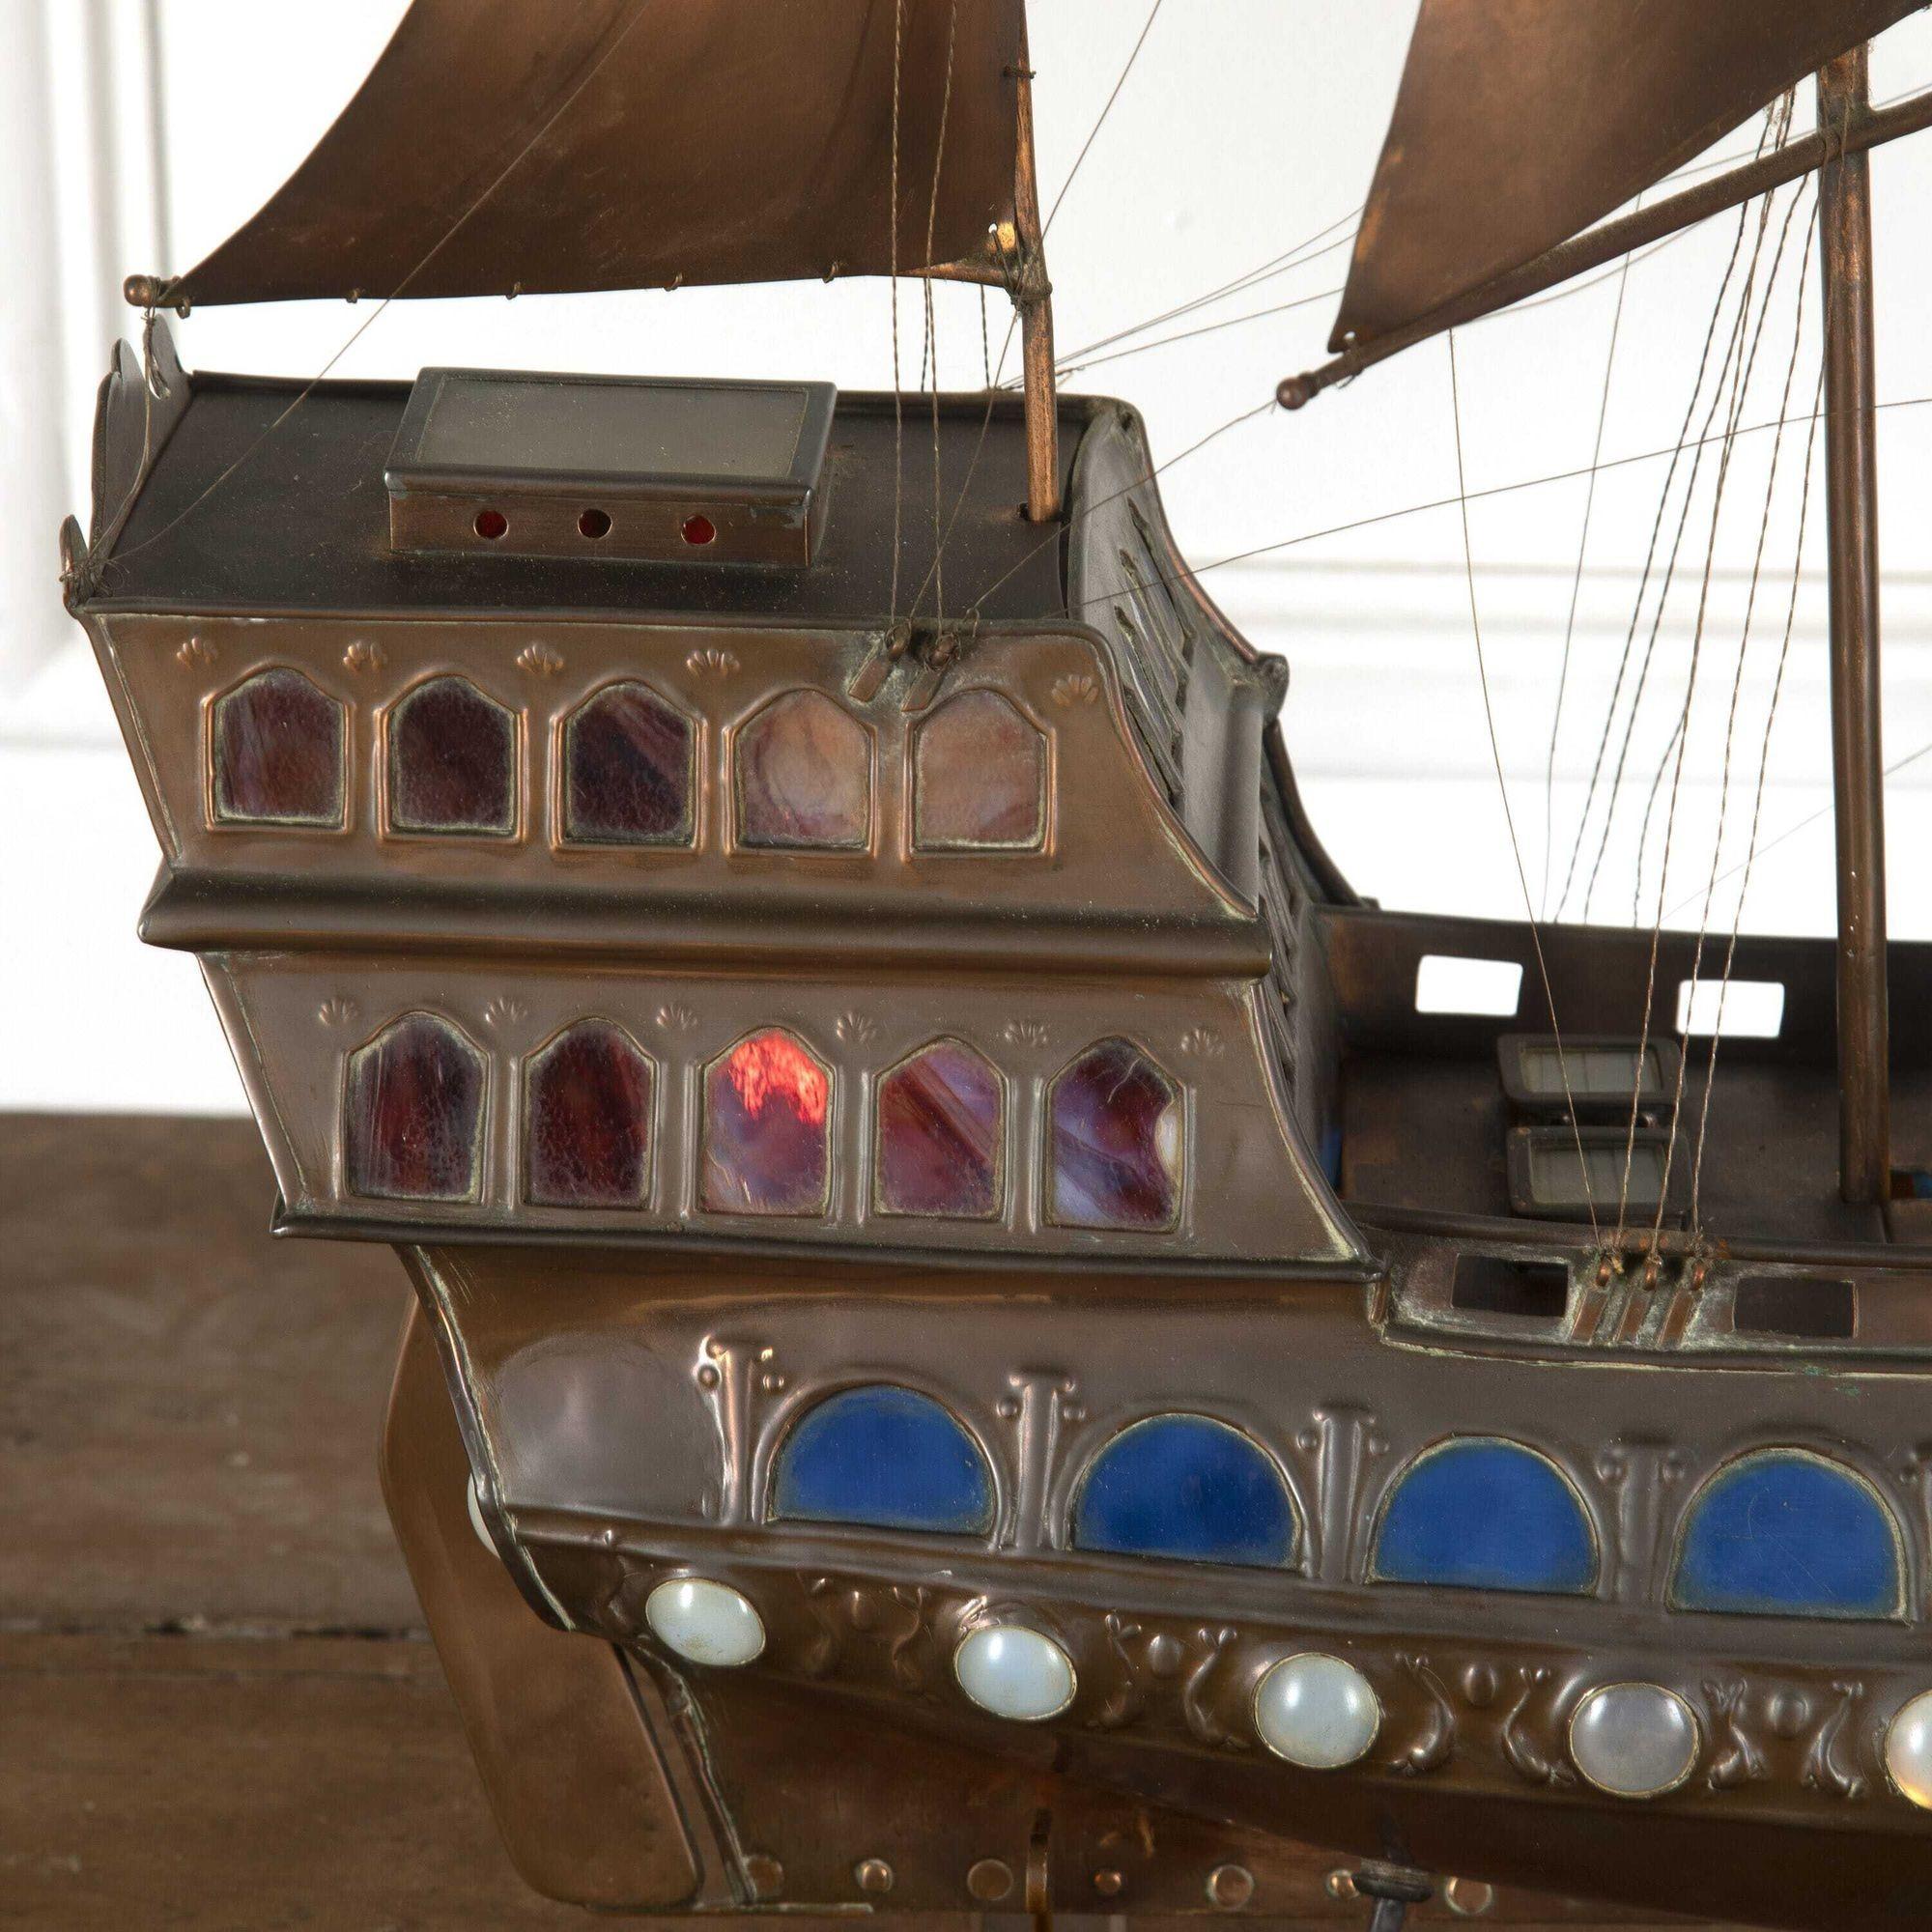 Extraordinary copper galleon, attributed to the Guild of Handicraft. 
This stunning ship demonstrates how Arts & Crafts revived the decorative arts, and gave new dignity to the craftsman in the wake of industrial revolution. 
The attention to